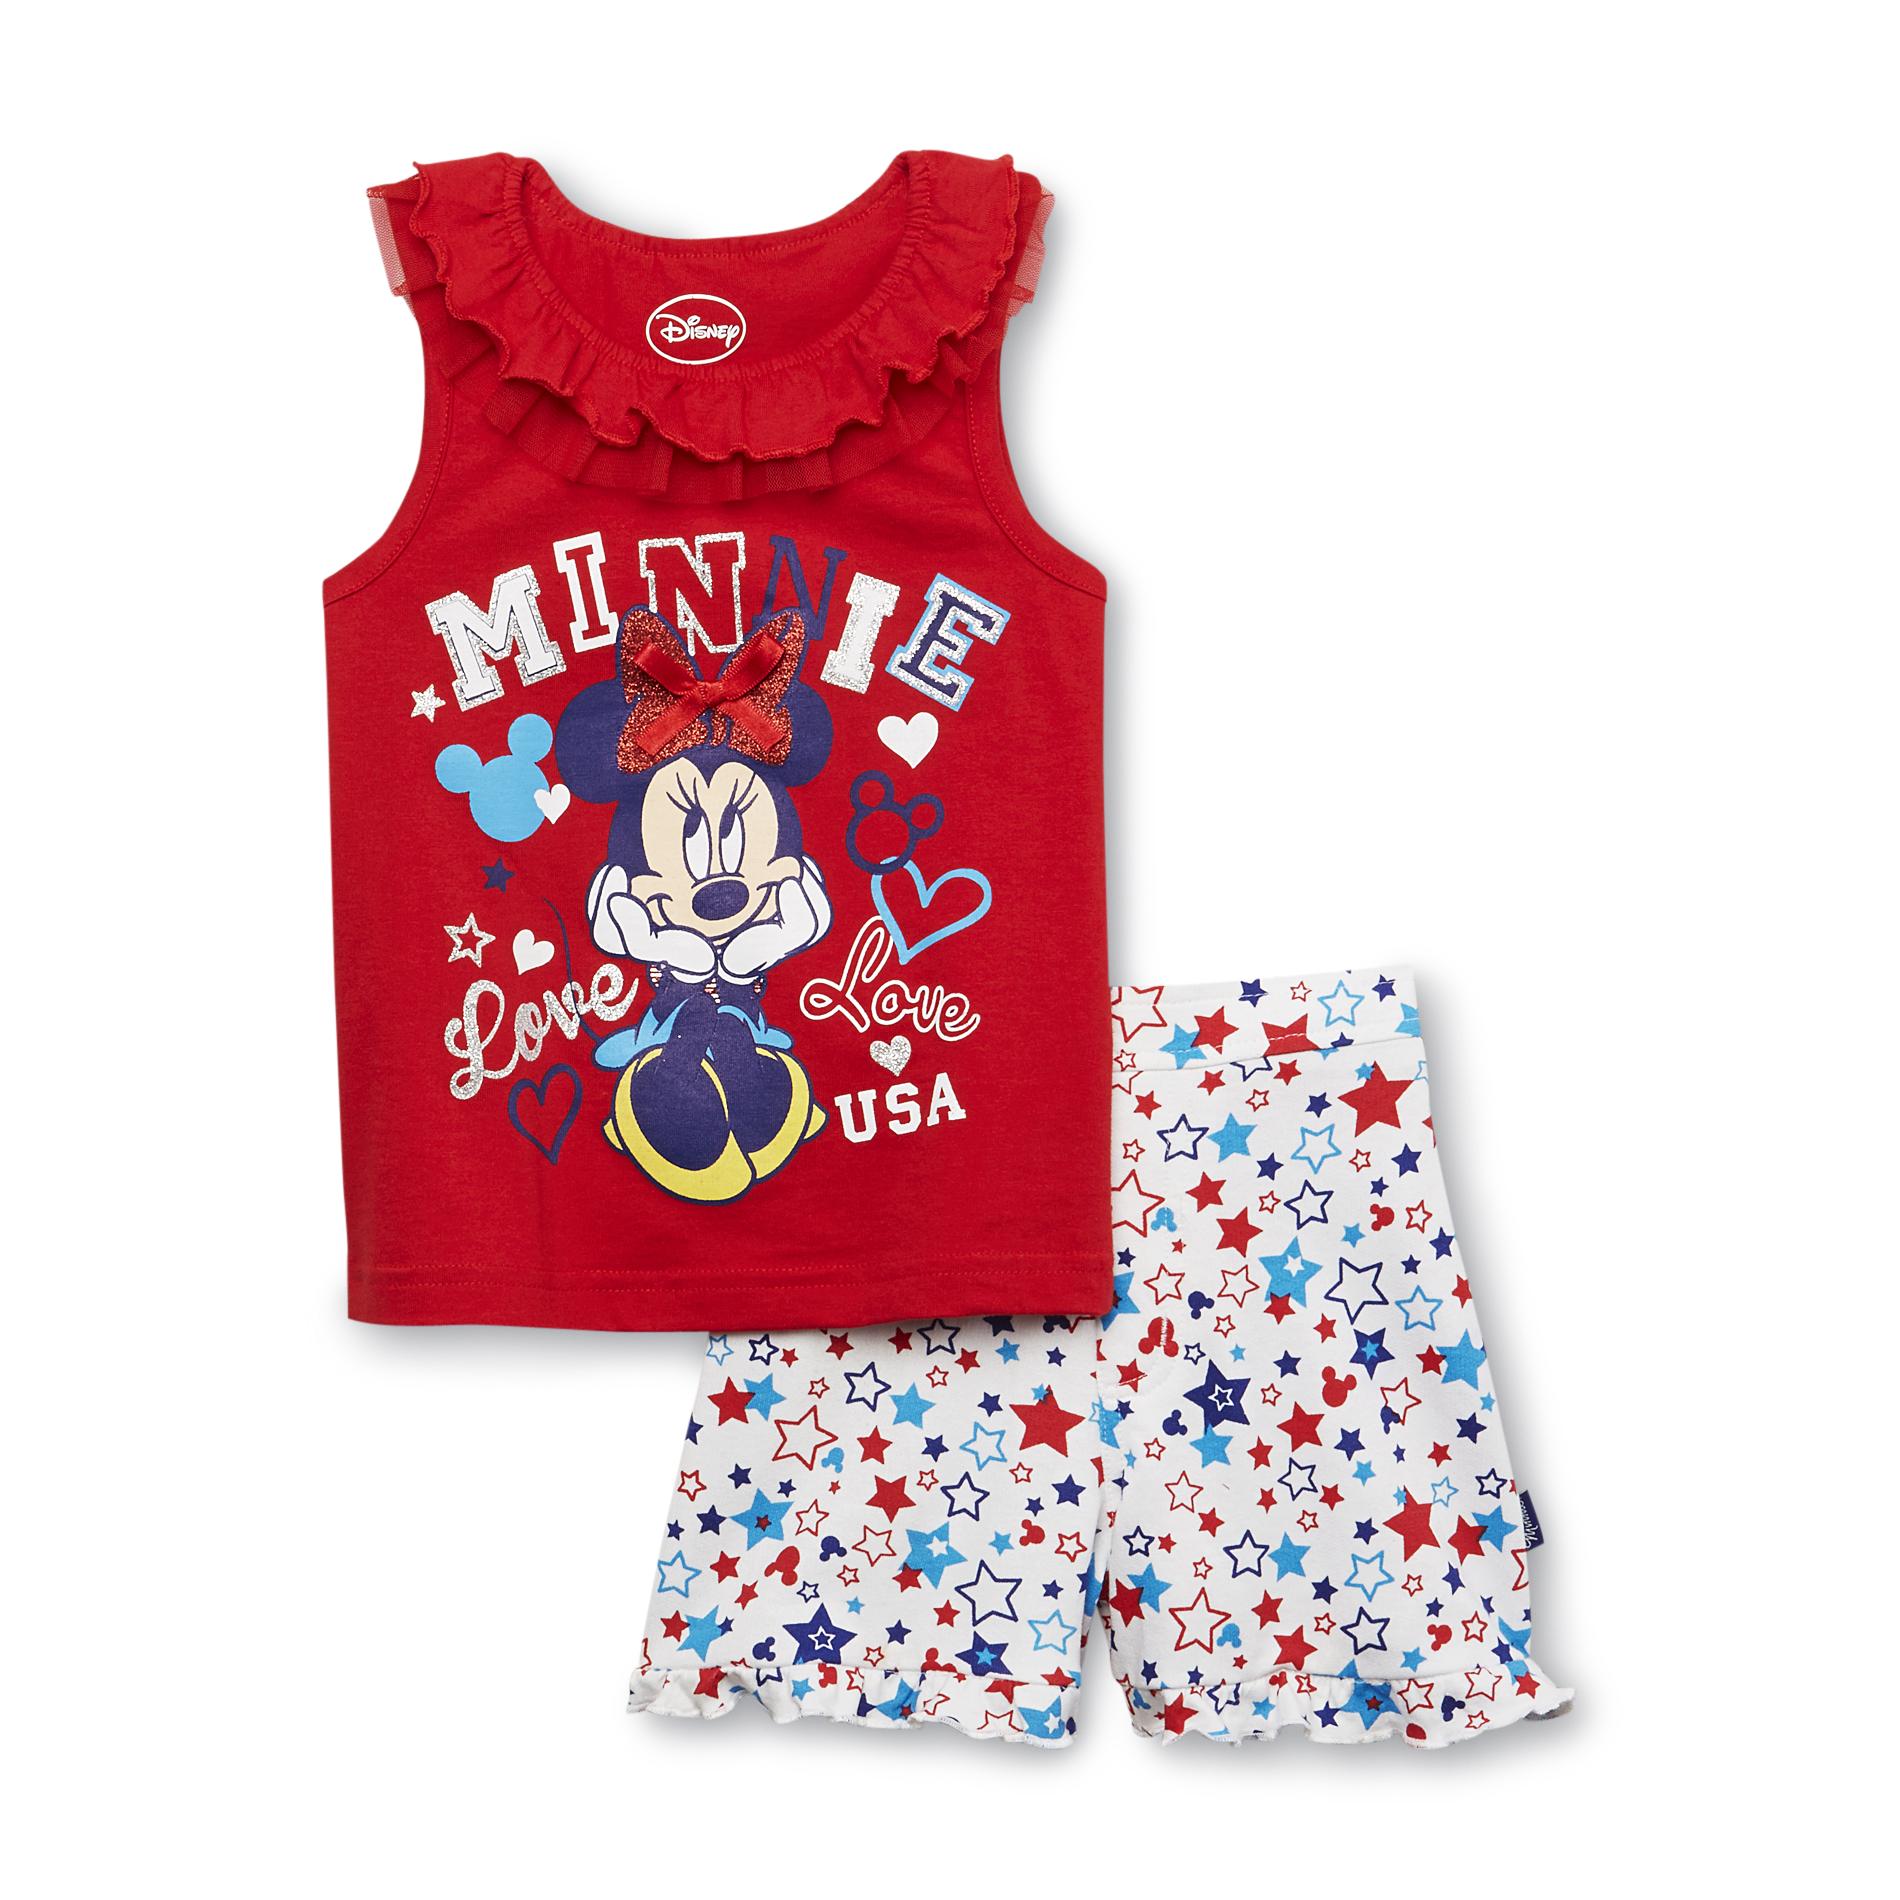 Disney Infant & Toddler Girl's Tank Top & Shorts - Minnie Mouse